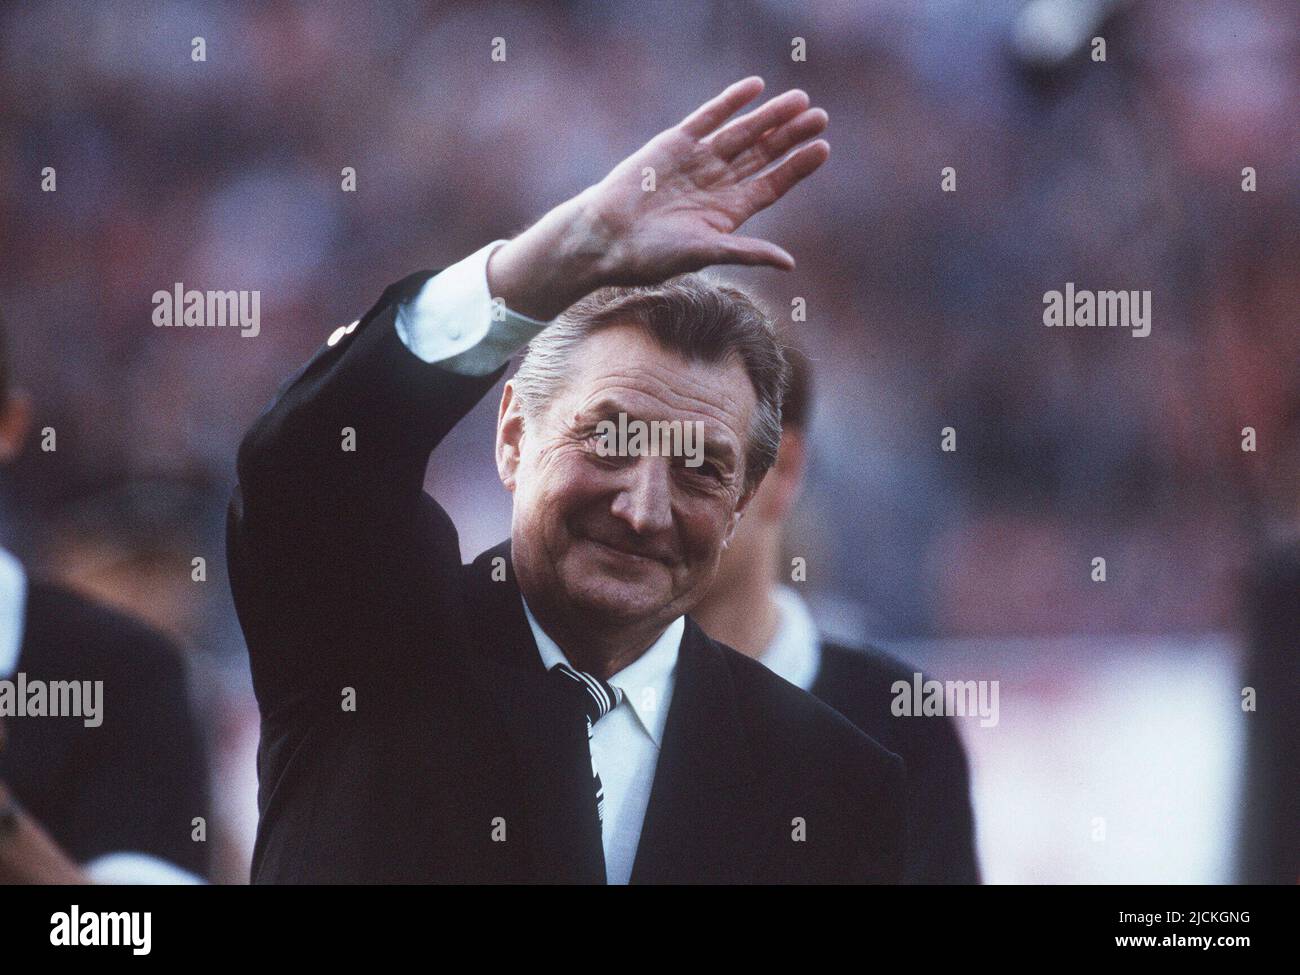 ARCHIVE PHOTO: 20 years ago, on June 17, 2002, football legend Fritz Walter died, 01SN Walter 1995SP.jpg Fritz WALTER, Germany, football, captains of the world champion team from 1954, honorary captain of the German national team, BB, in a suit, waving, friendly smiling, Qf. Stock Photo